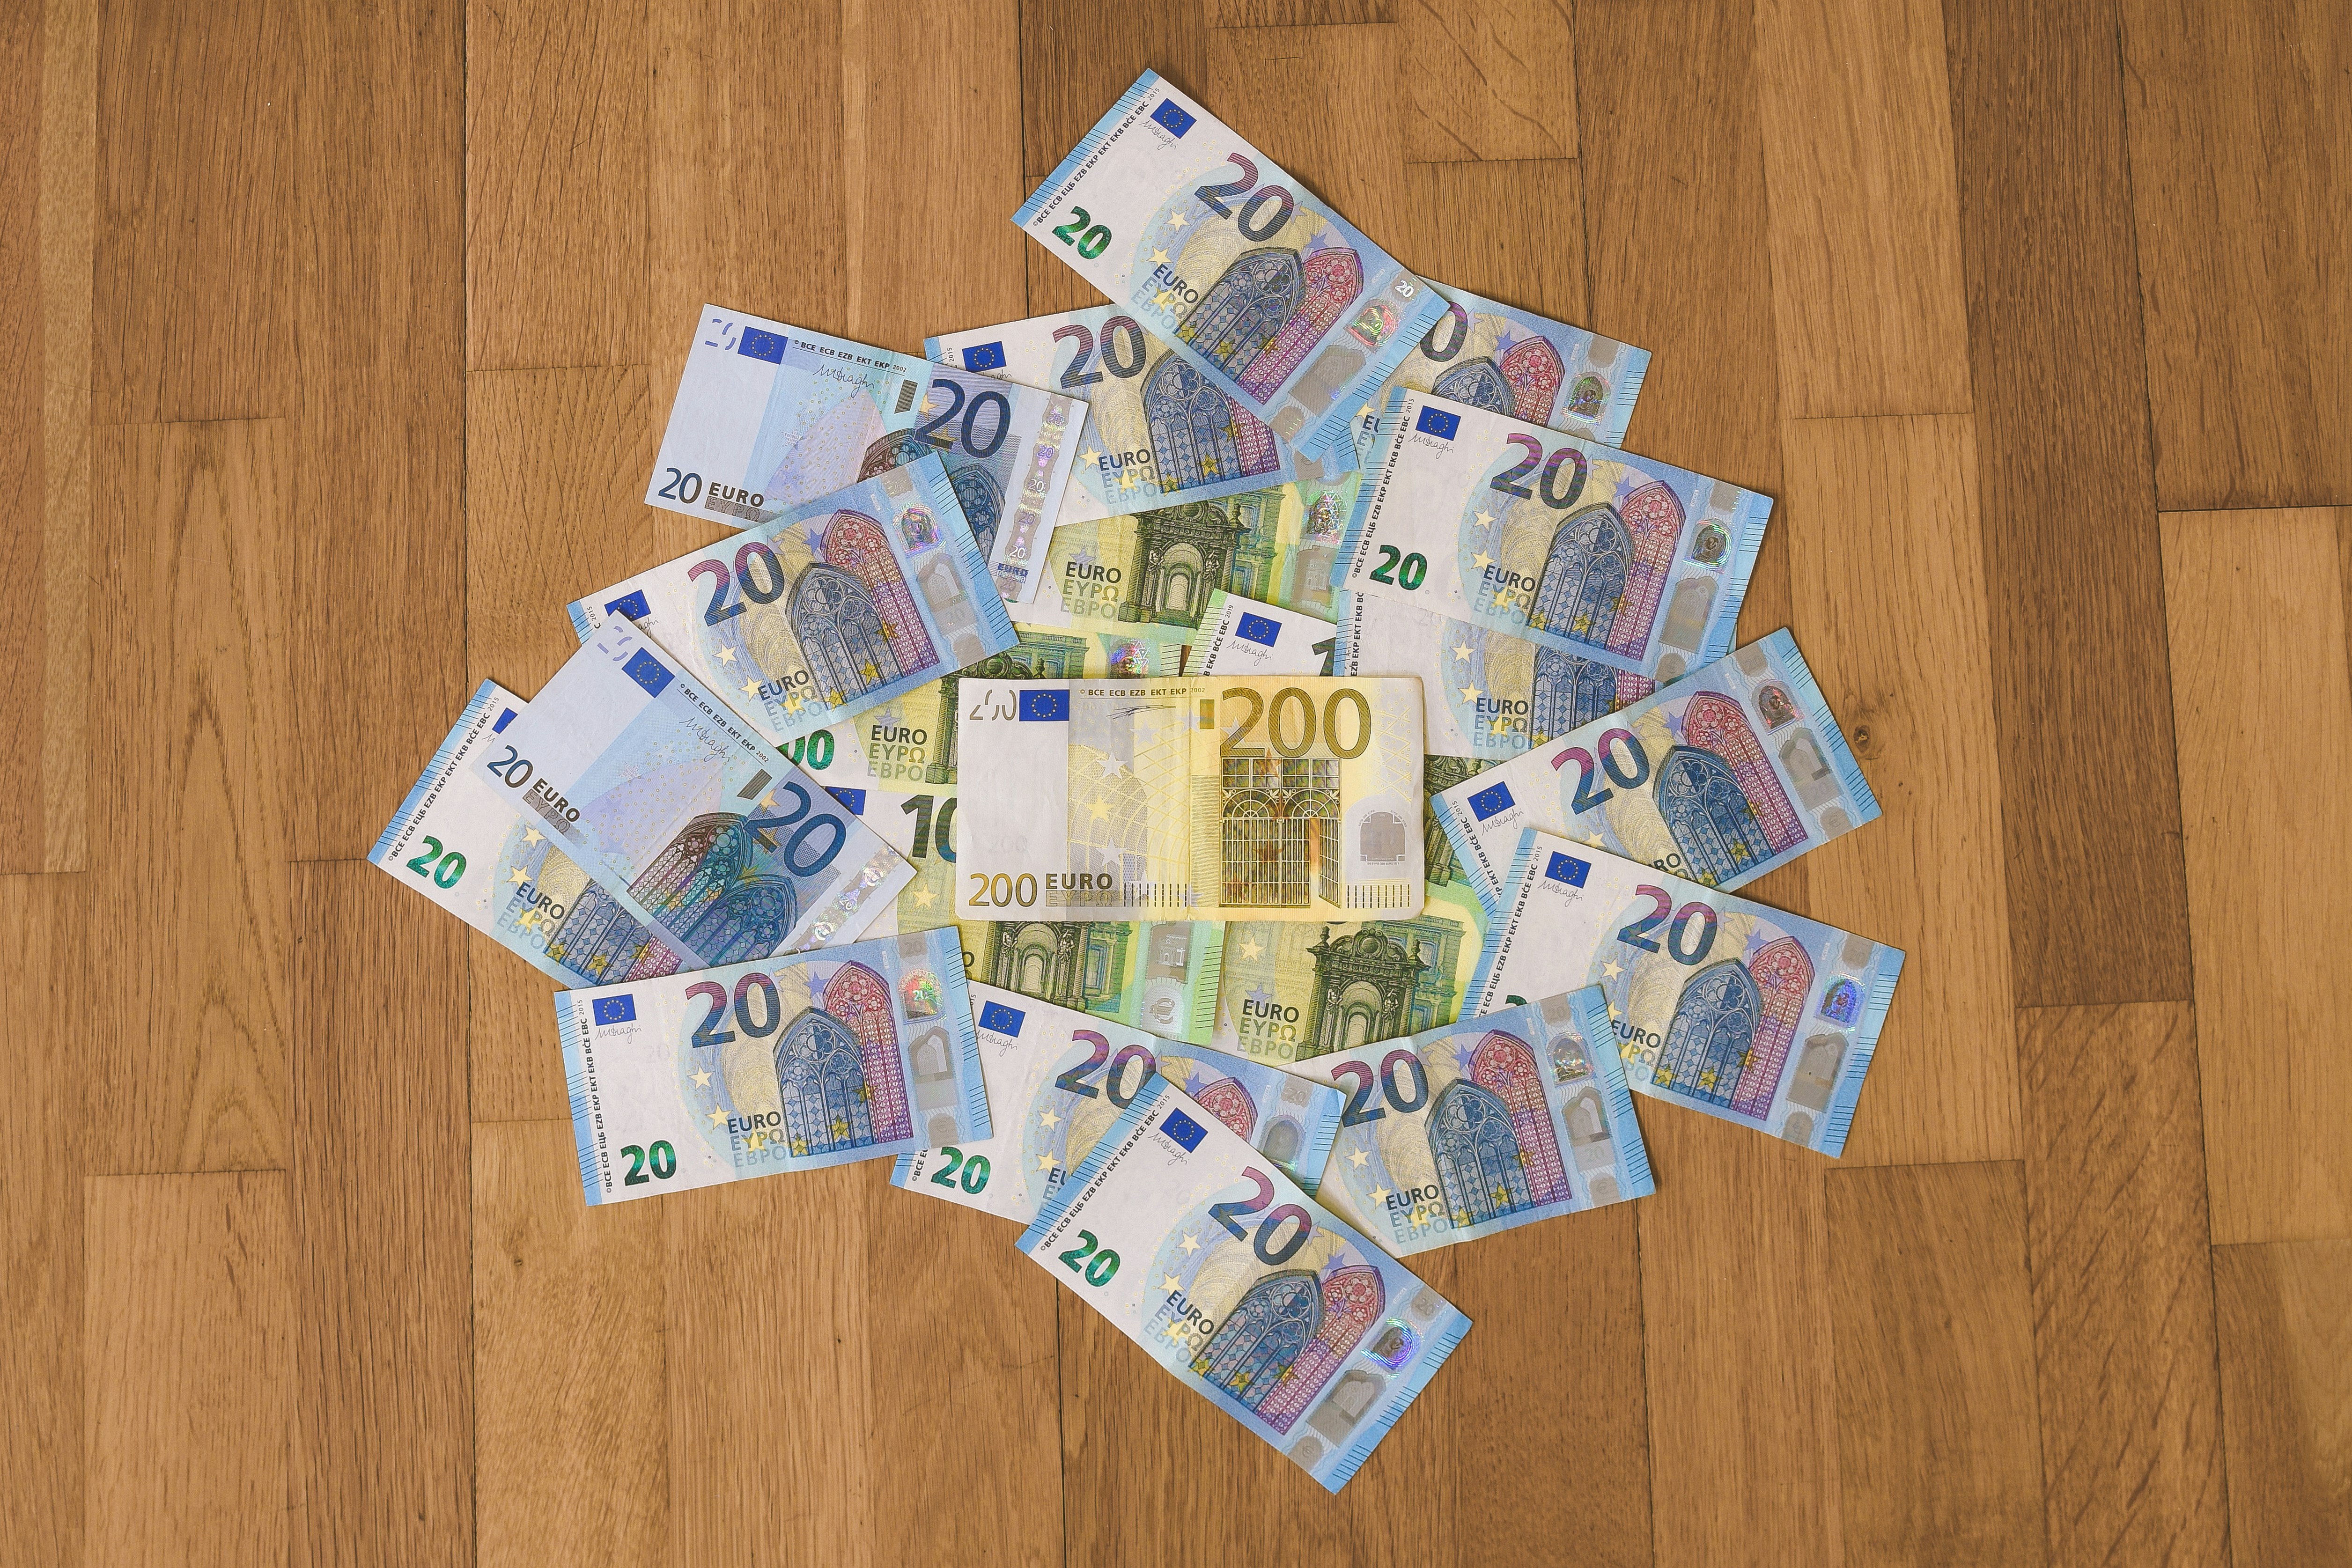 20, 100, and 200 Euro (EUR) banknotes placed on a wooden surface.